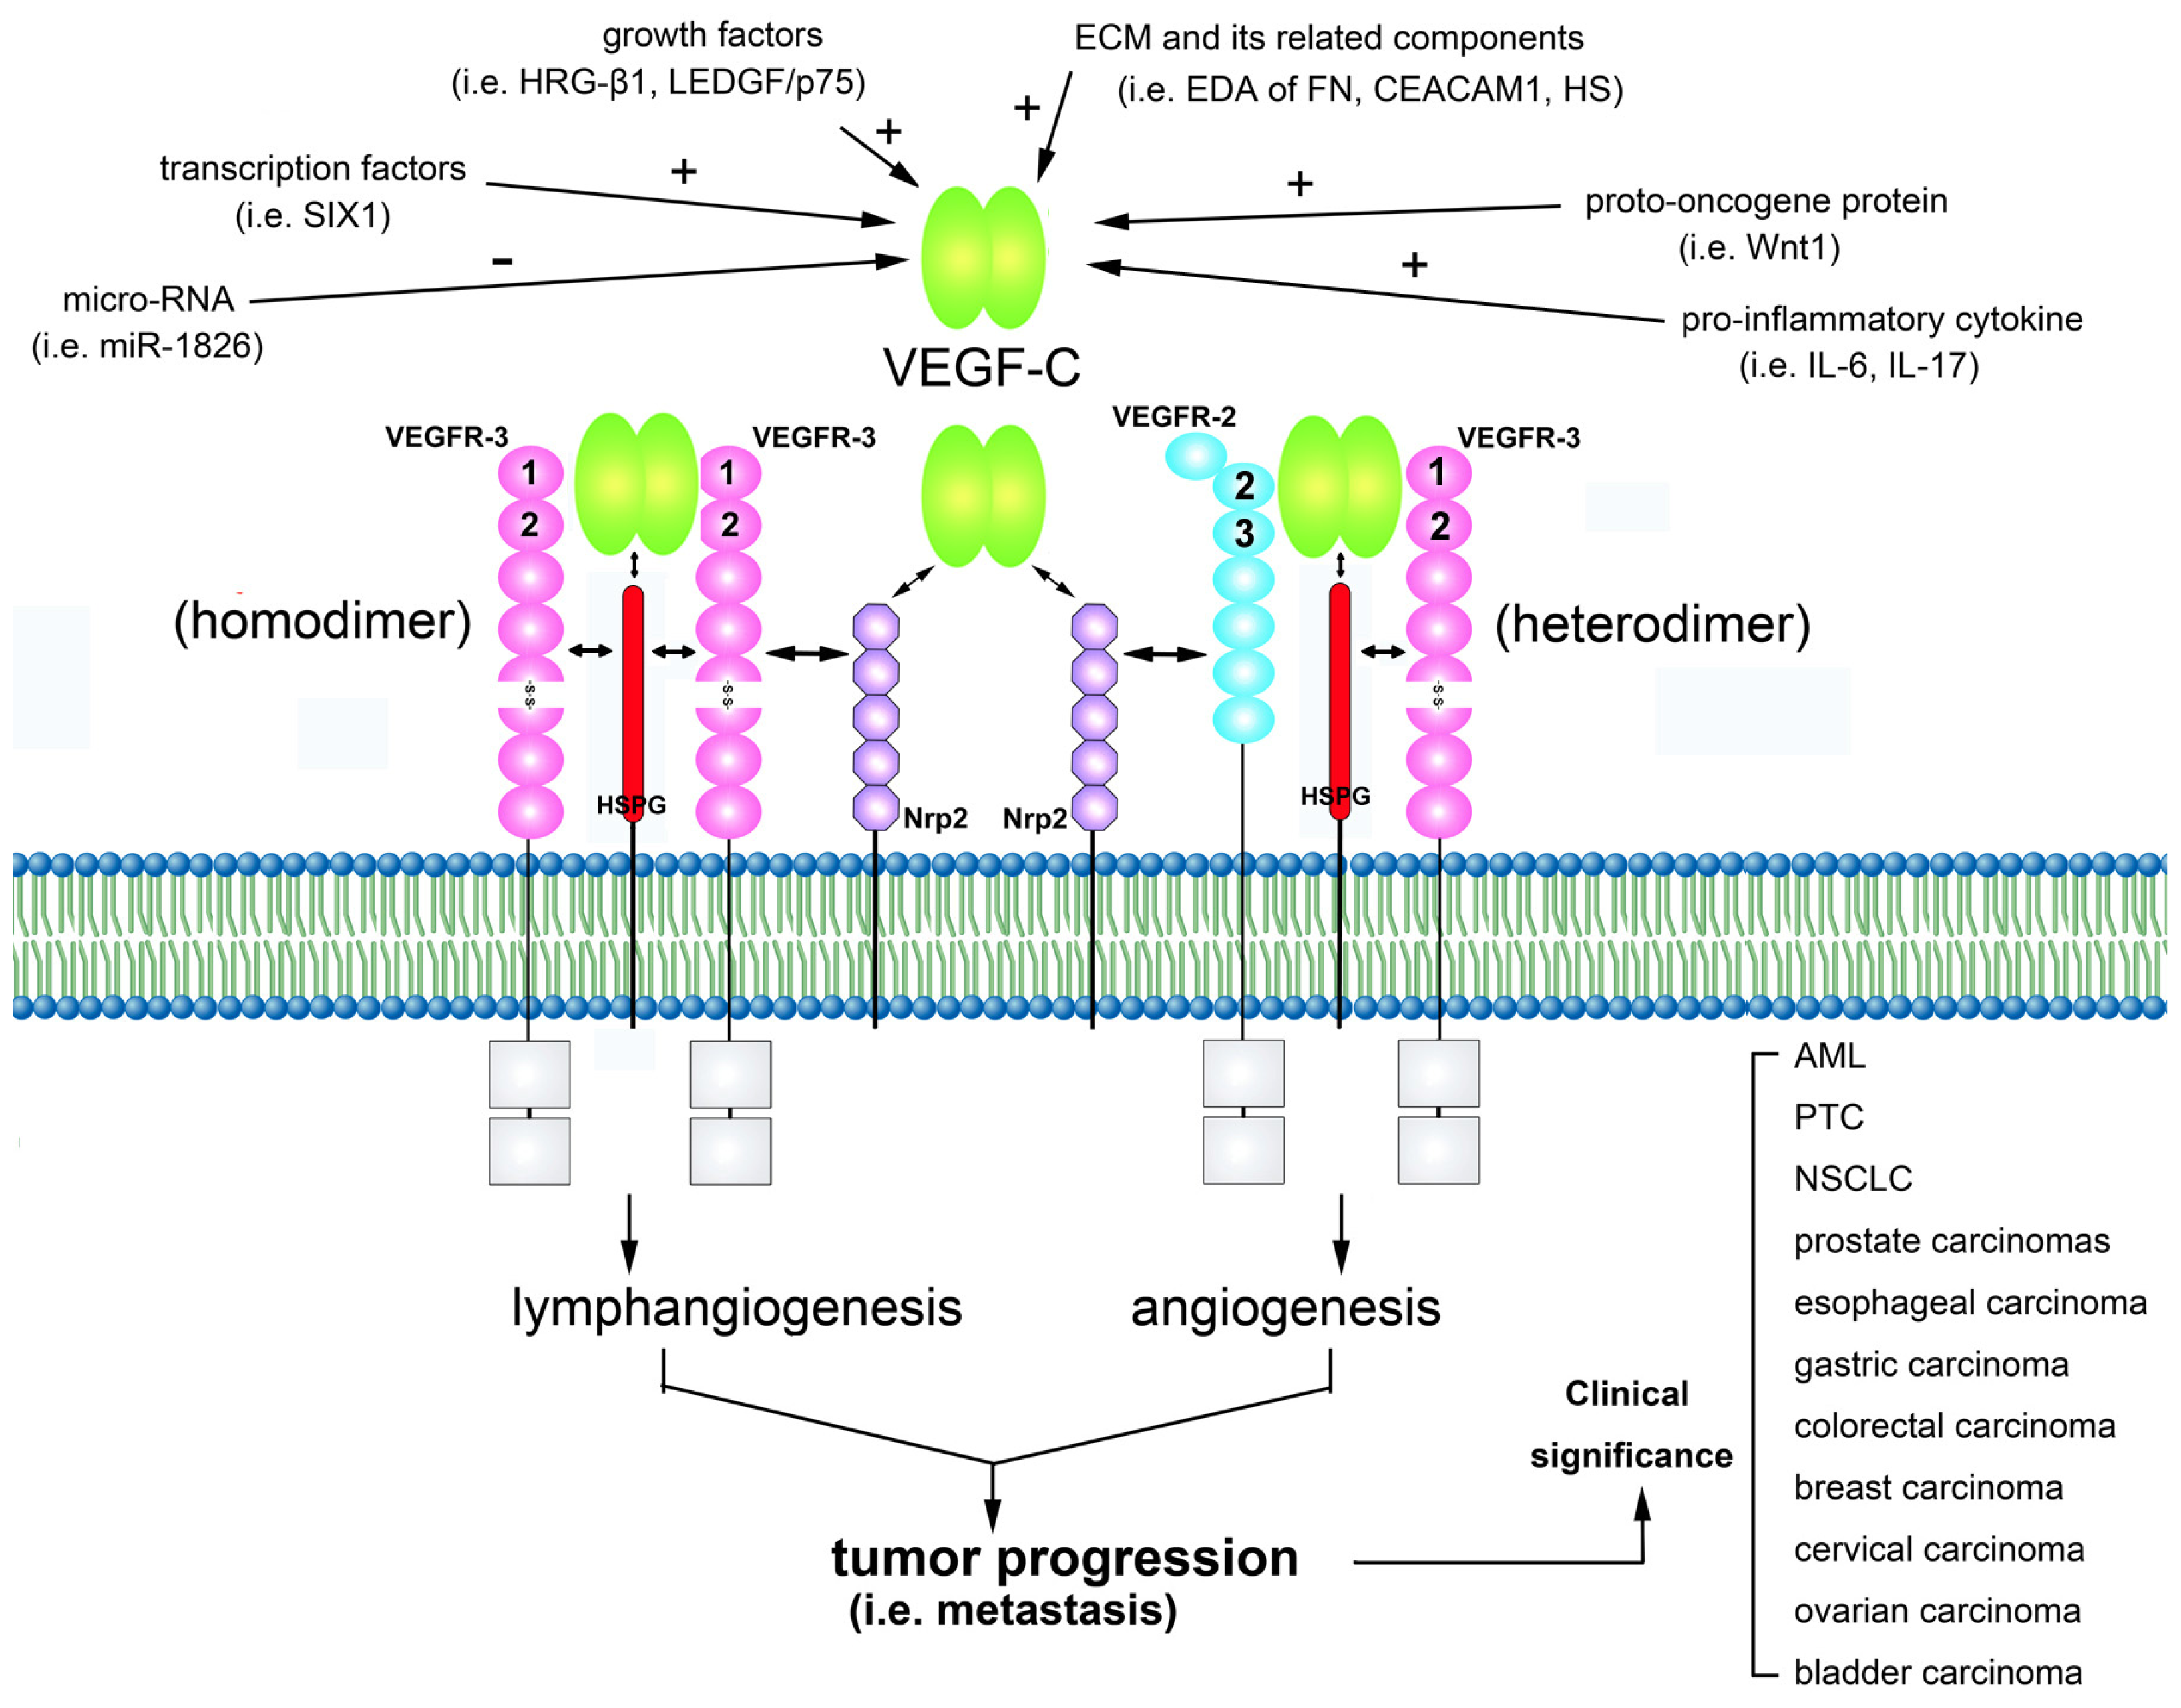 IJMS | Free Full-Text | The Role of the VEGF-C/VEGFRs Axis in 